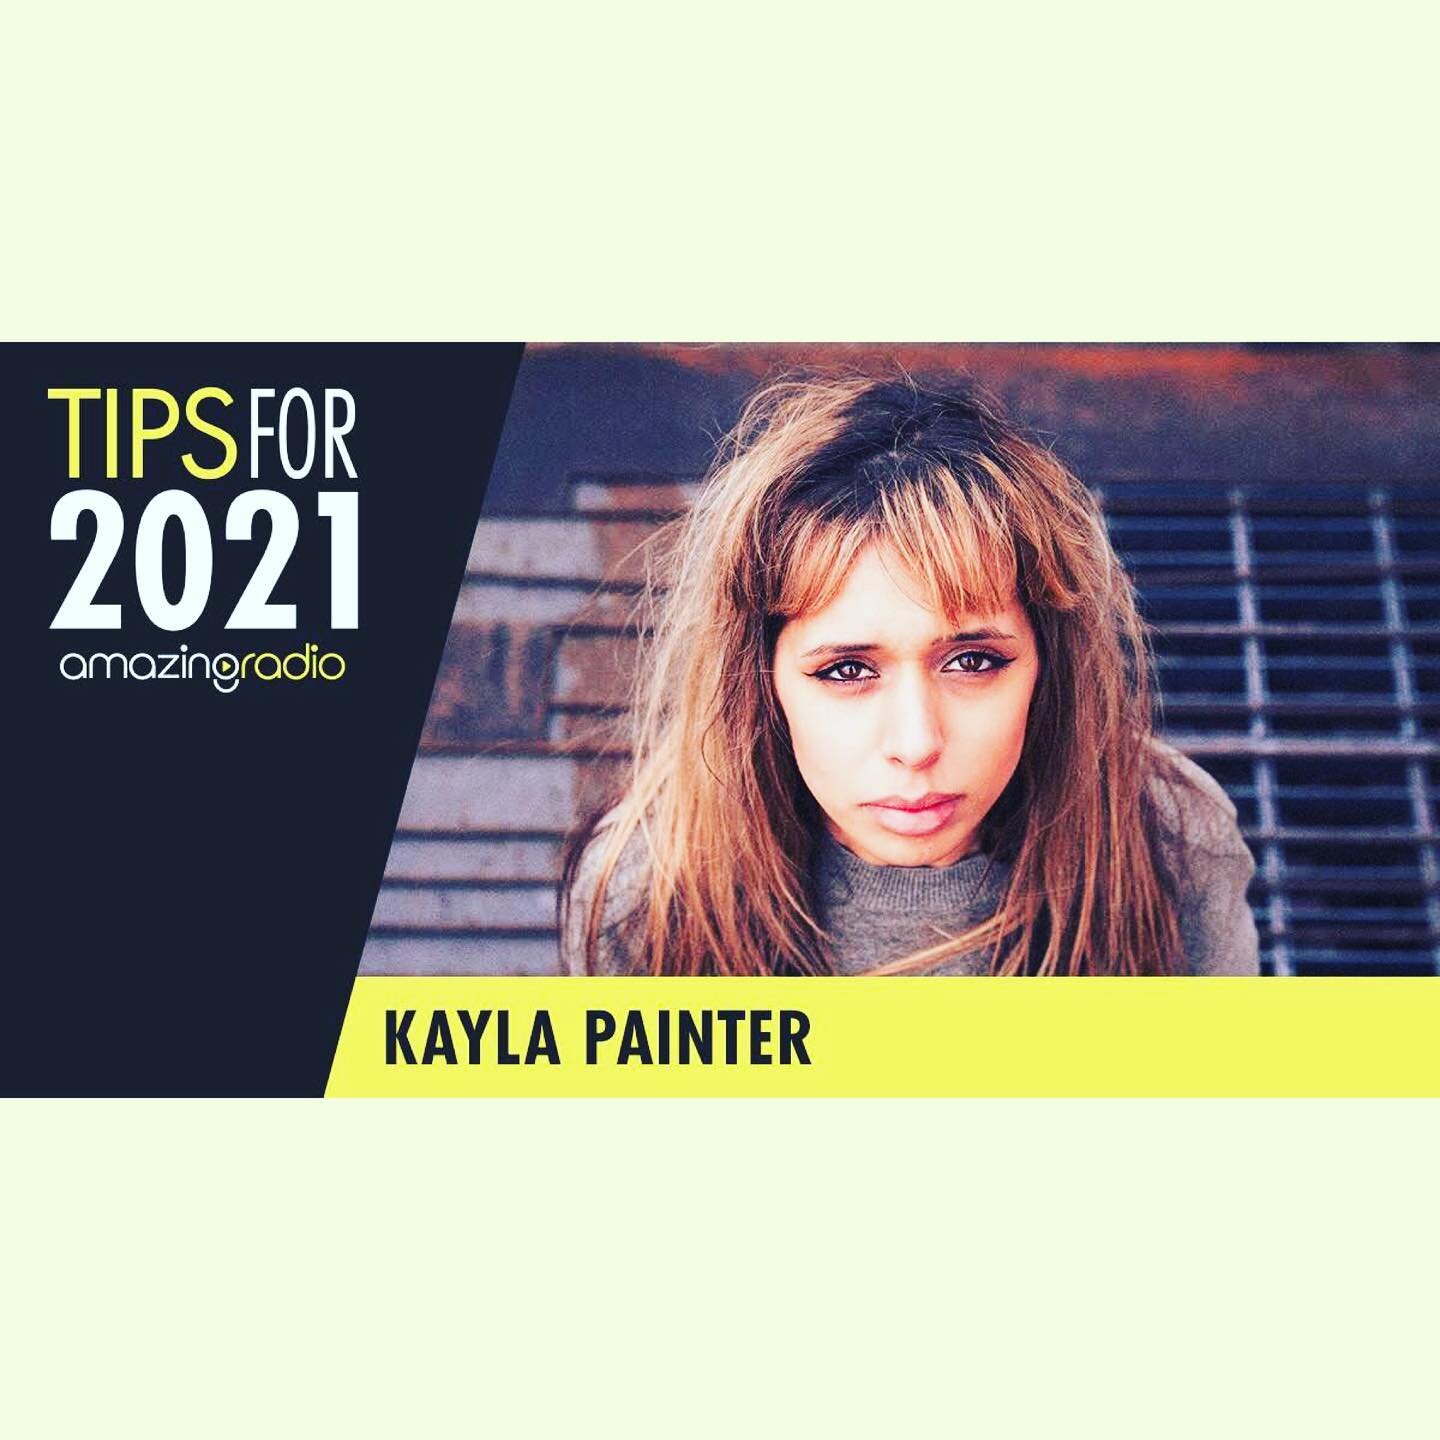 Big love to @amazingradio @amazingradiouk for selecting me as a top tip artist for 2021! Thank you for all of the support you&rsquo;ve given me this year 🌖🔥💛